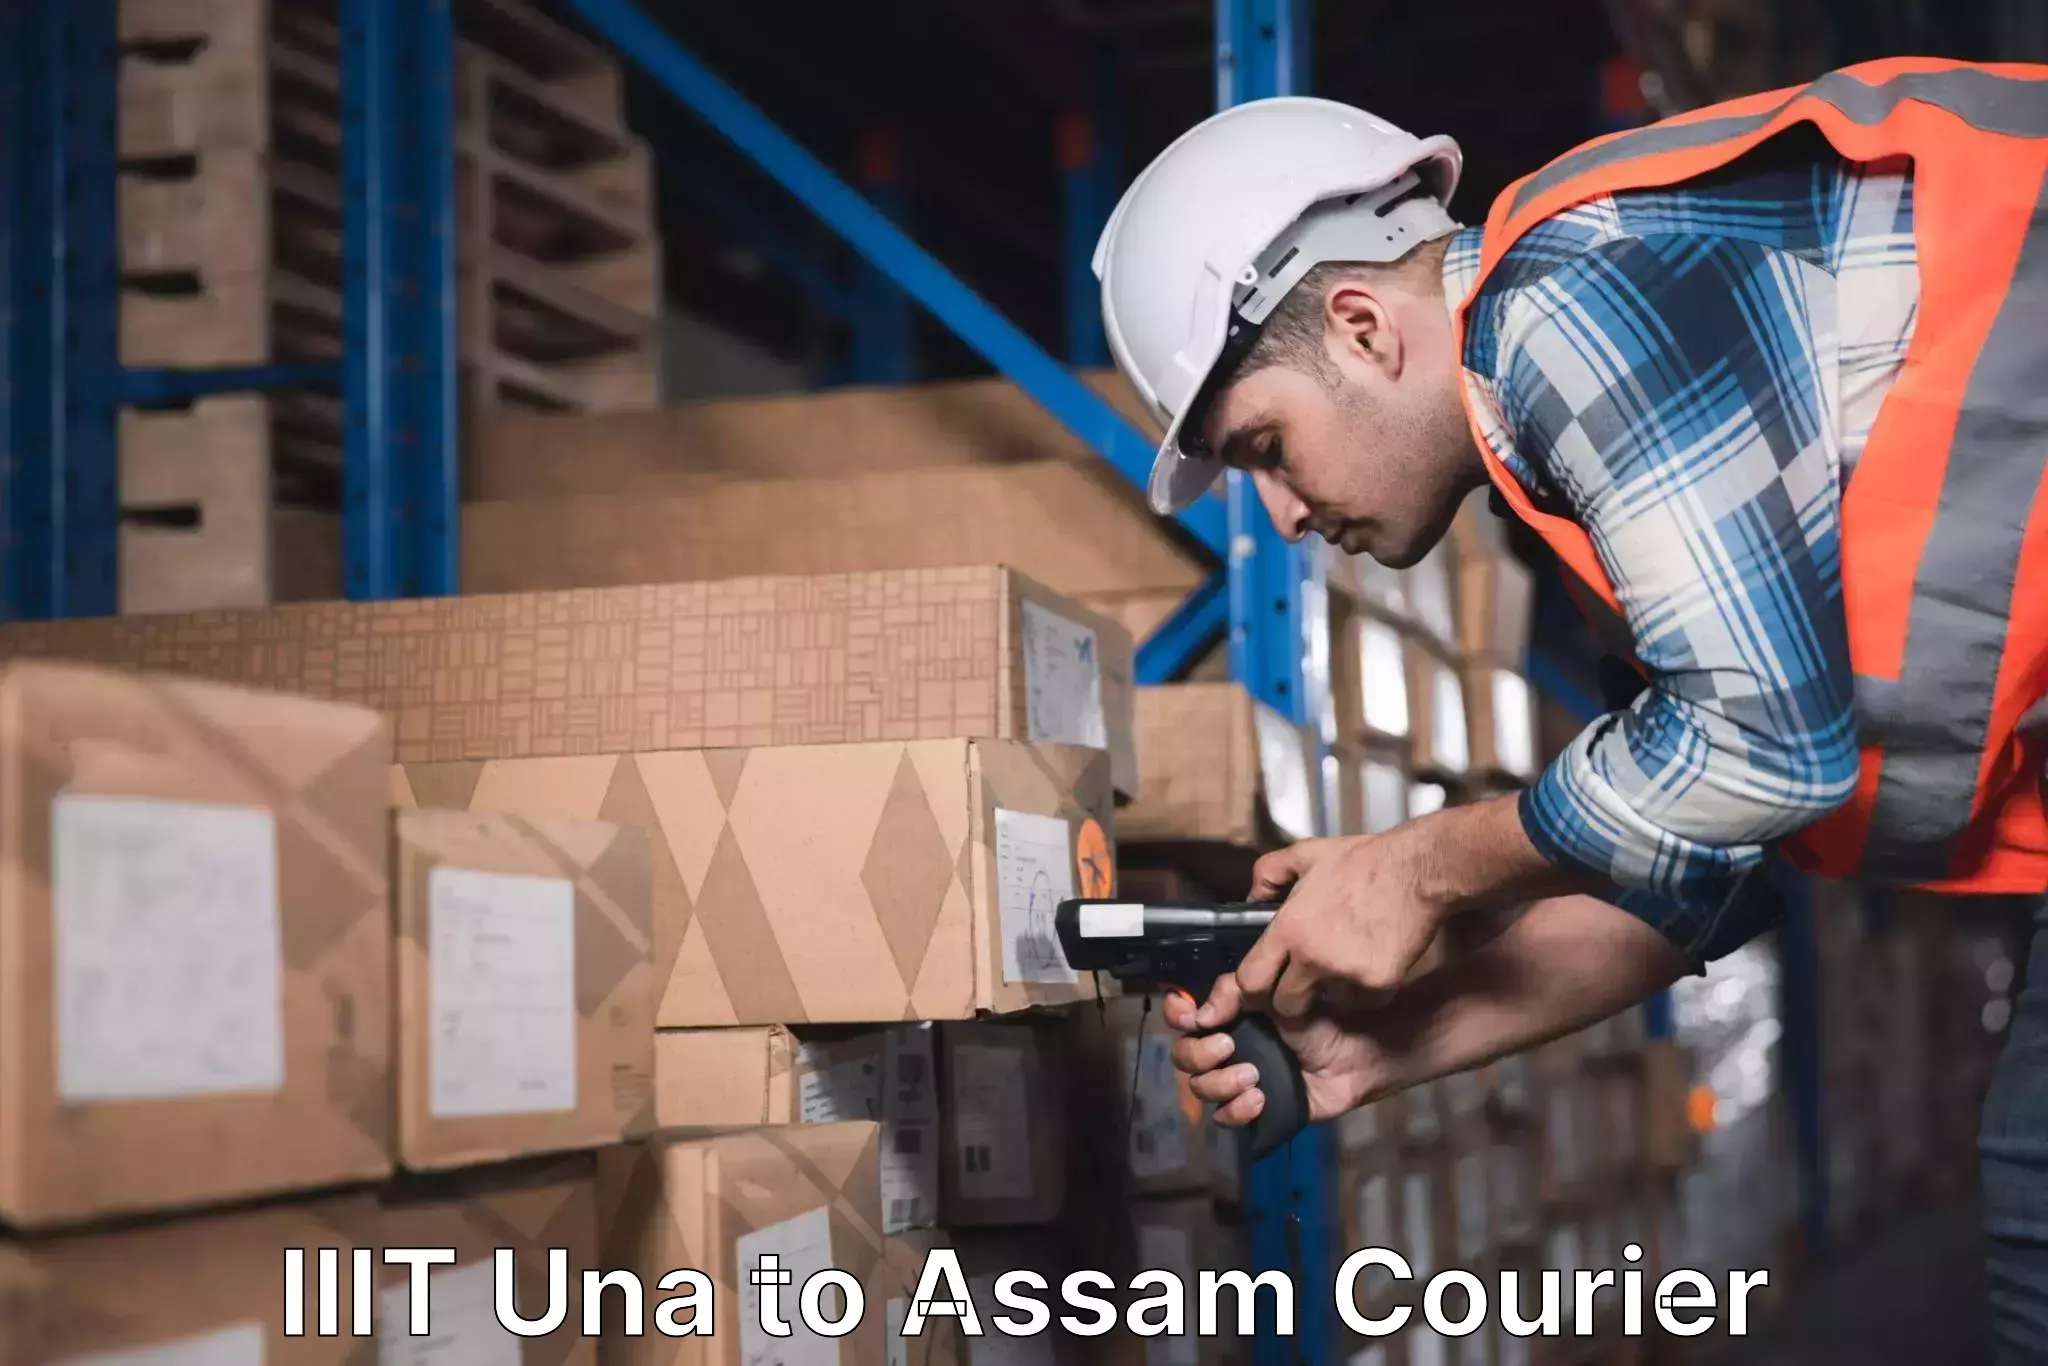 International courier networks IIIT Una to Karbi Anglong